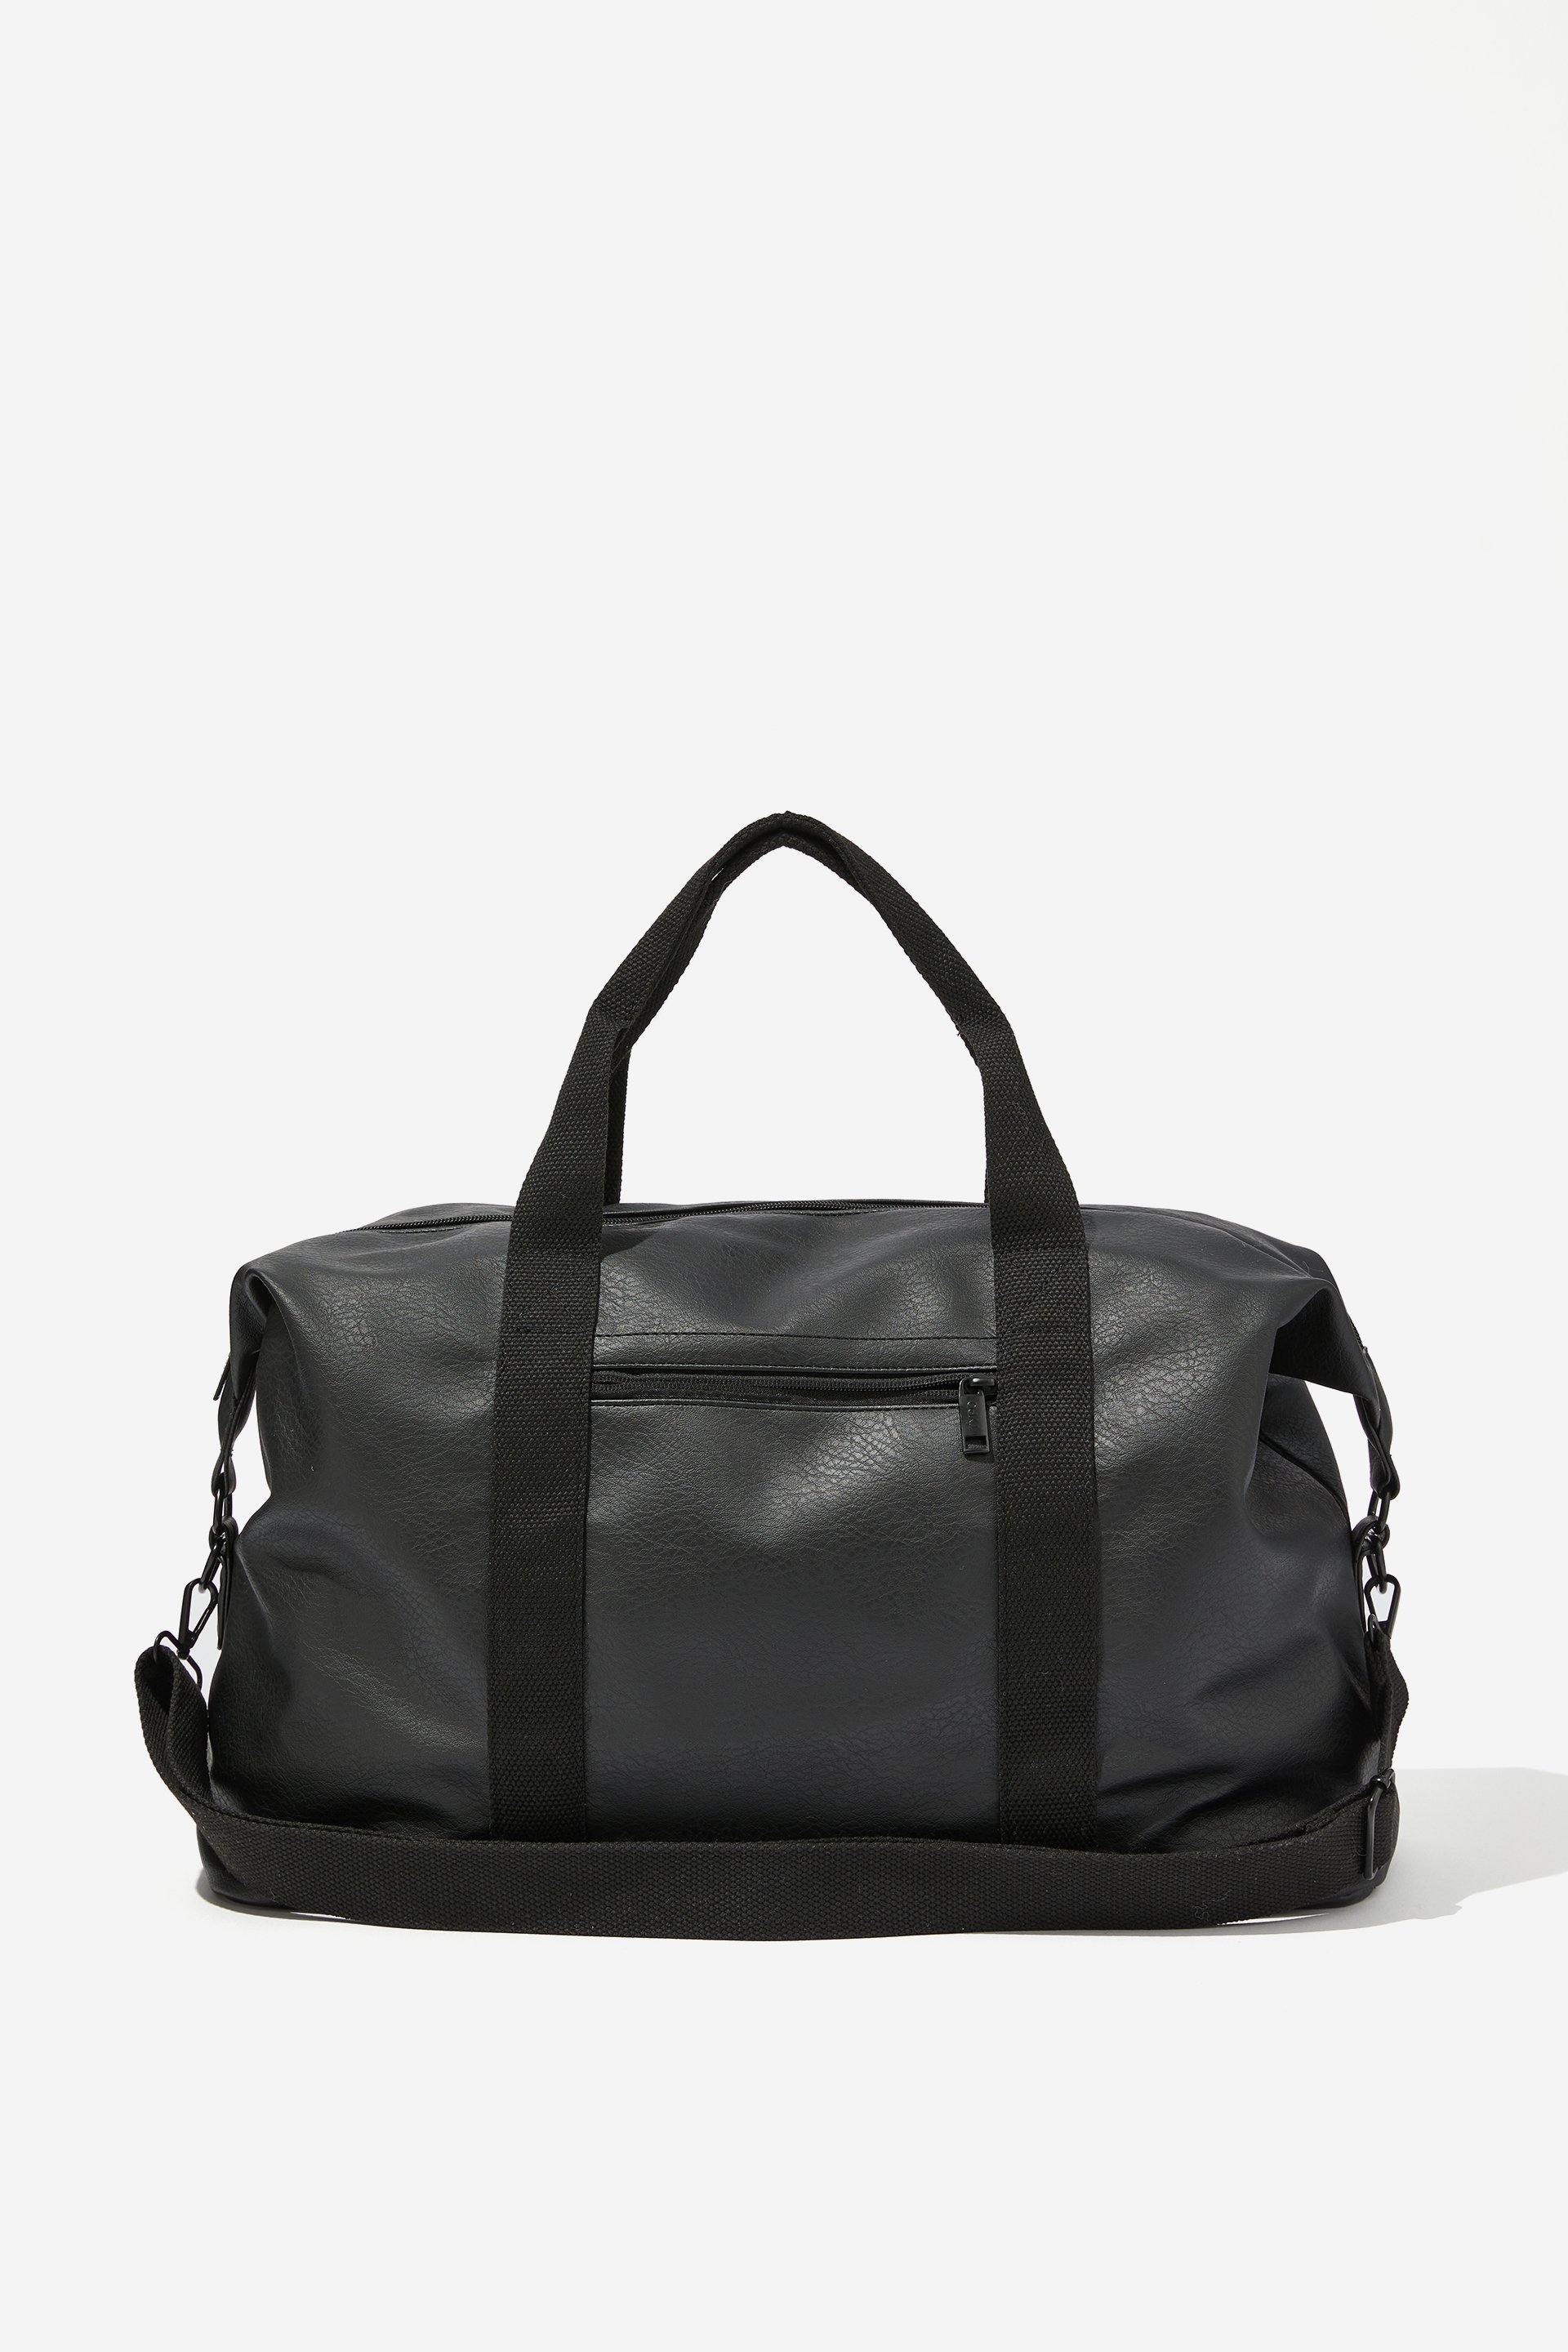 Typo - Off The Grid Hold All Duffle Bag - Black